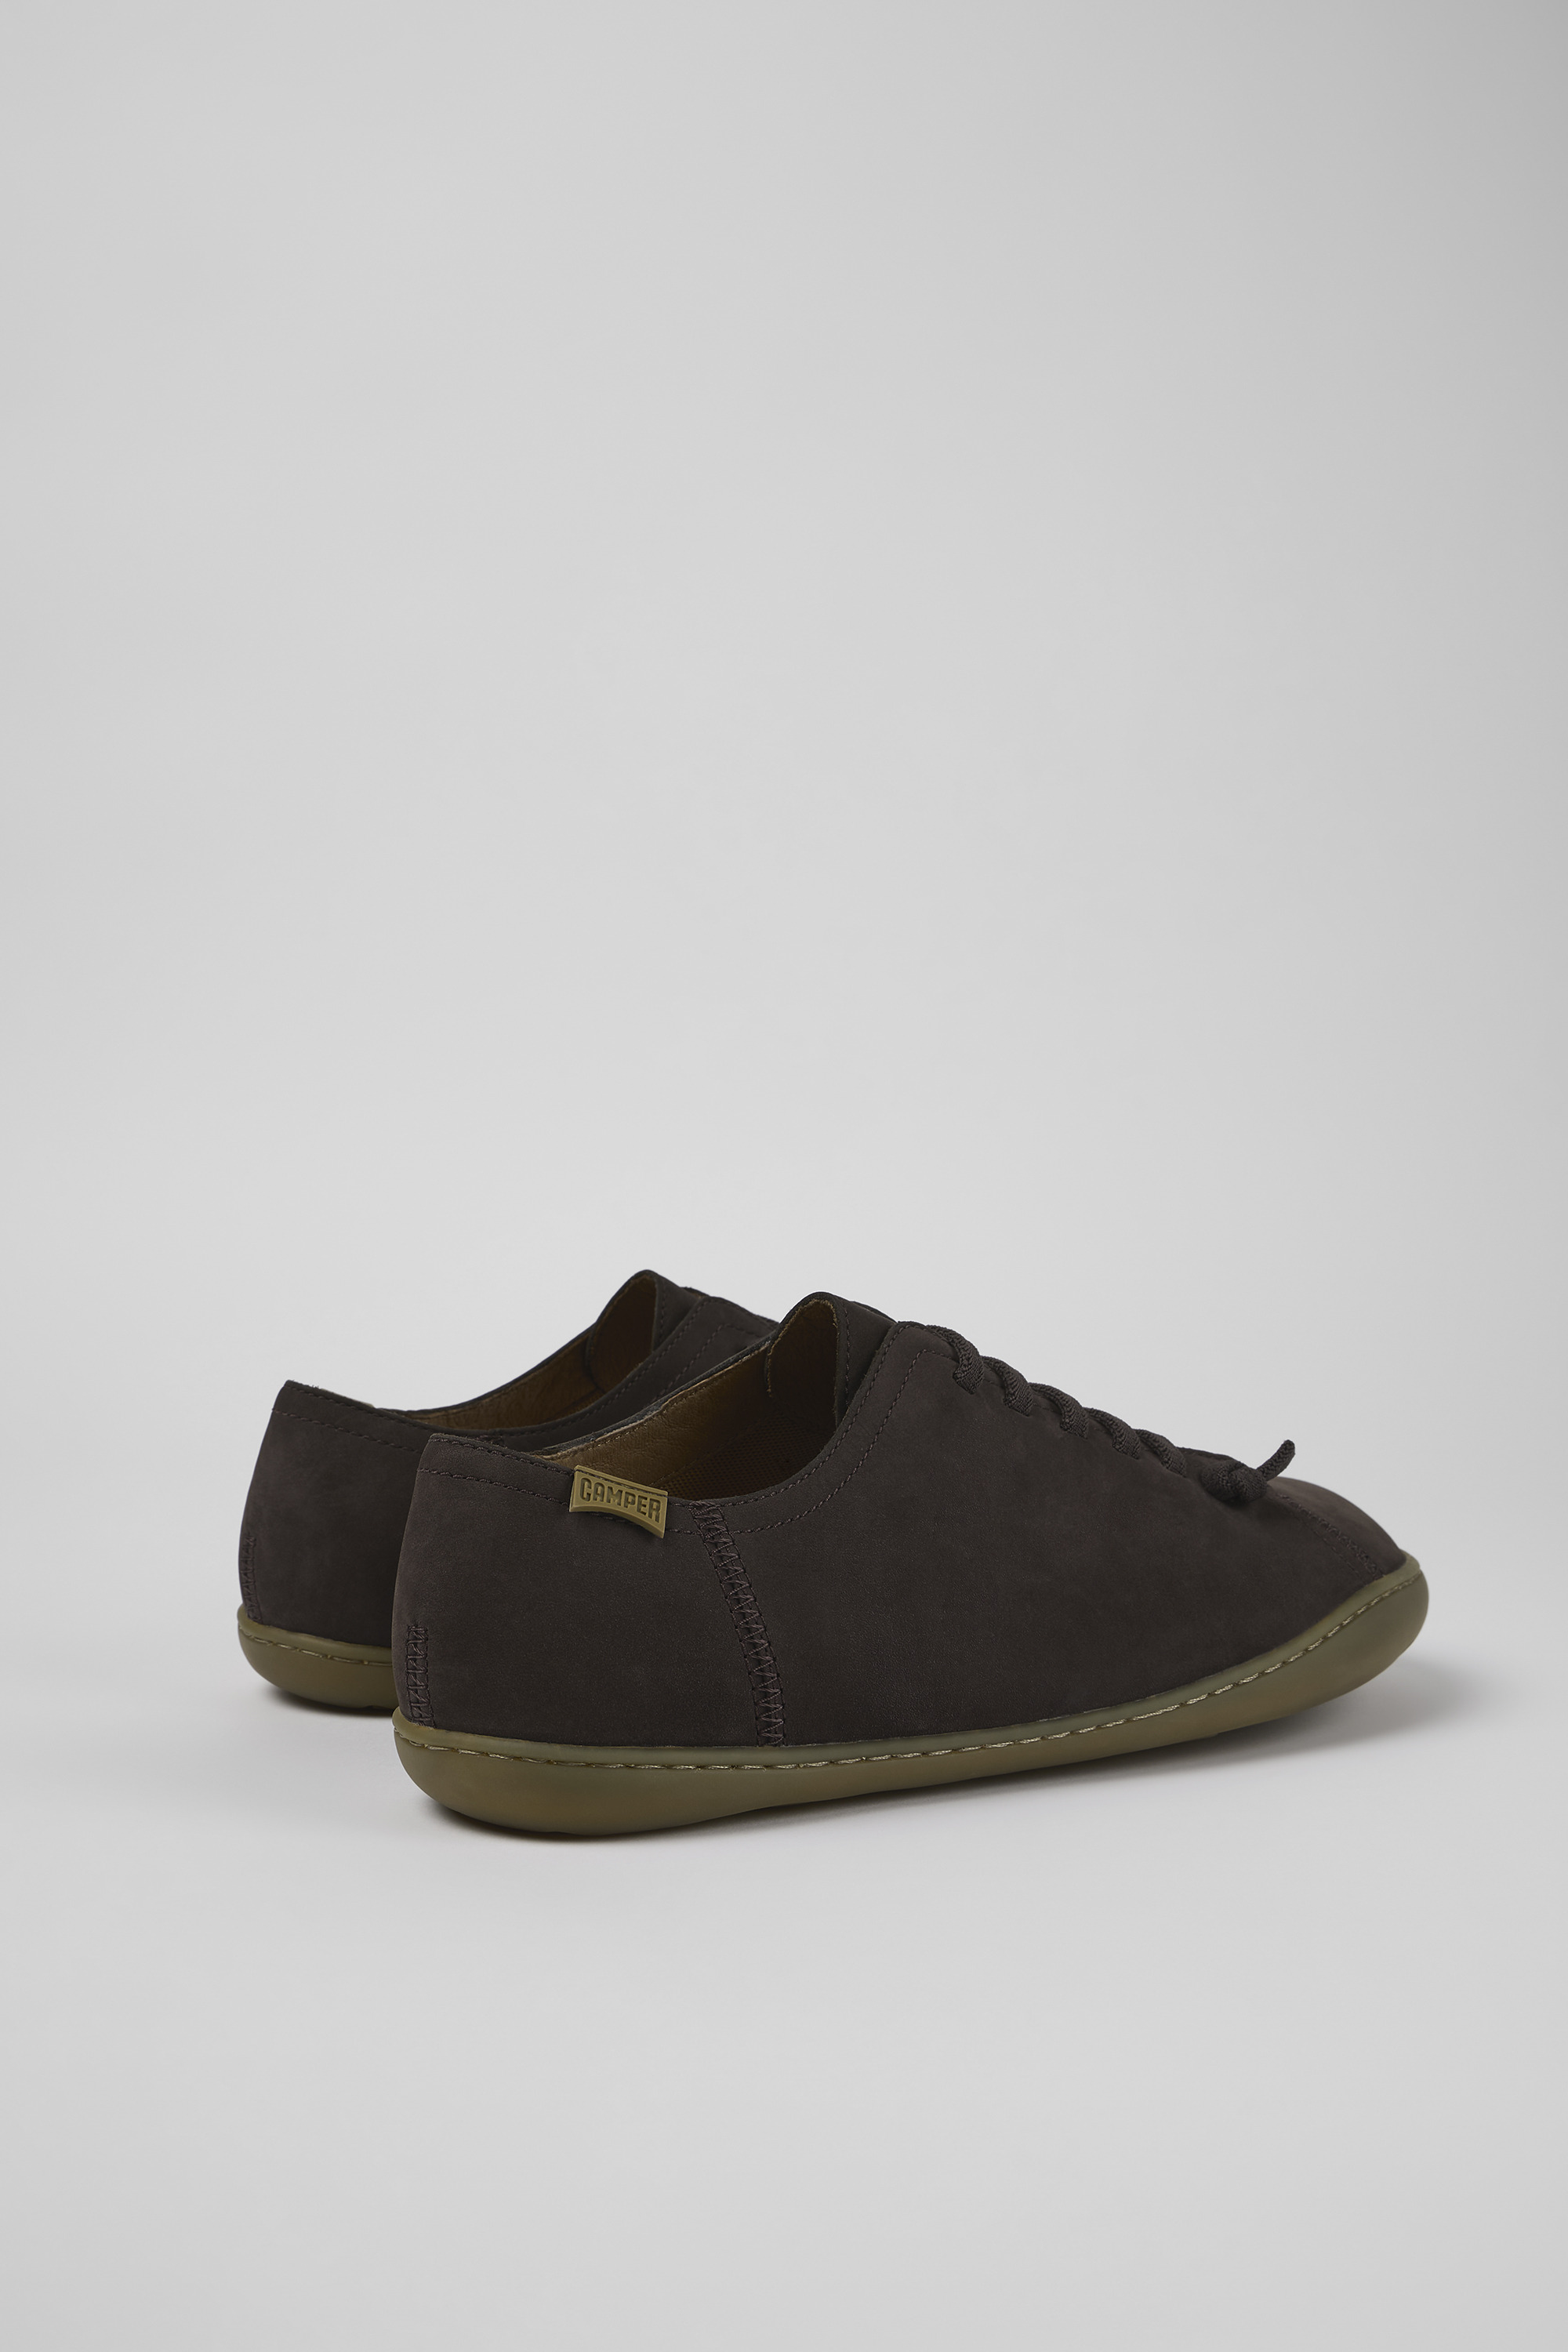 Chaussures casual Peu Homme, Automne/Hiver Camper France